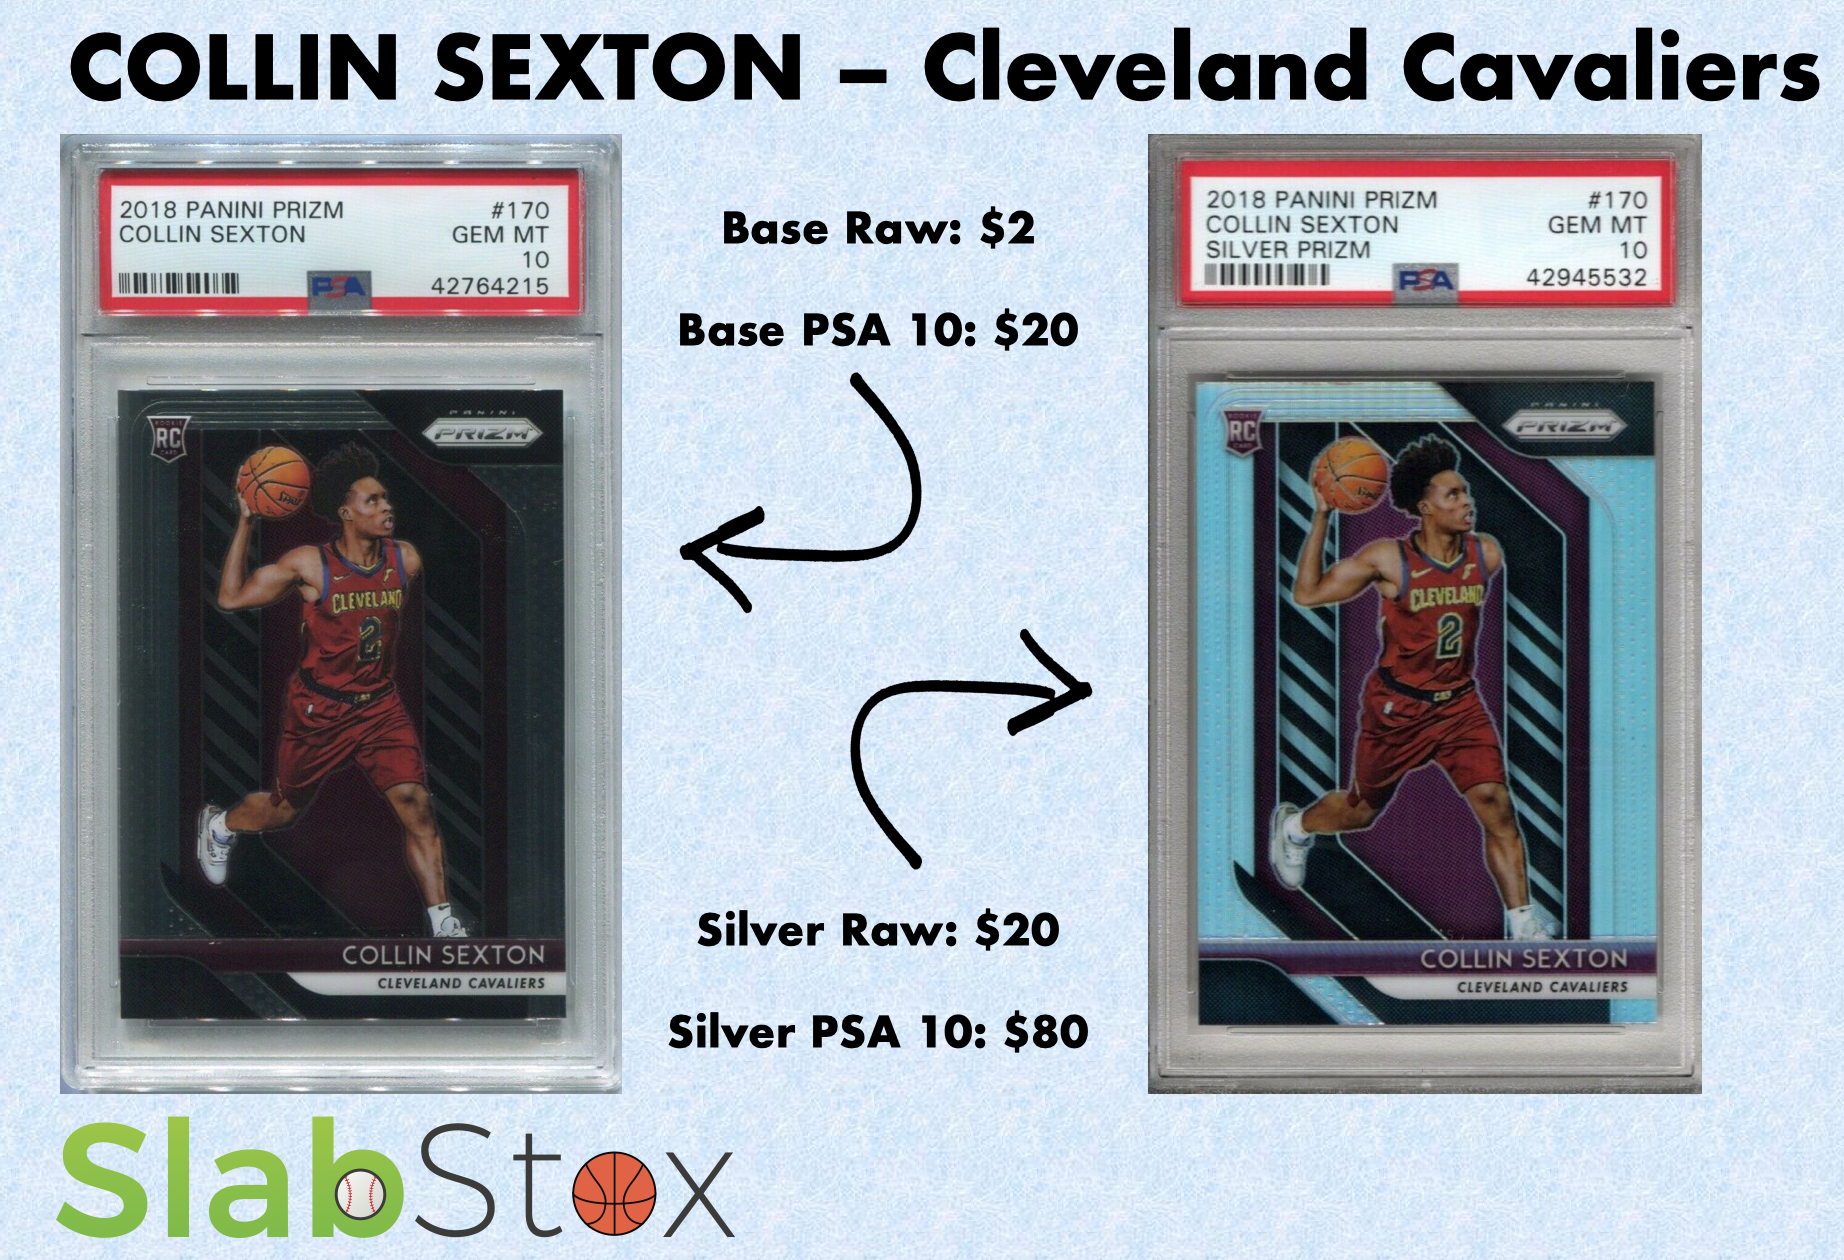 Graphic image of sports cards of Collin Sexton of the Cleveland Cavaliers with the SlabStox logo underneath